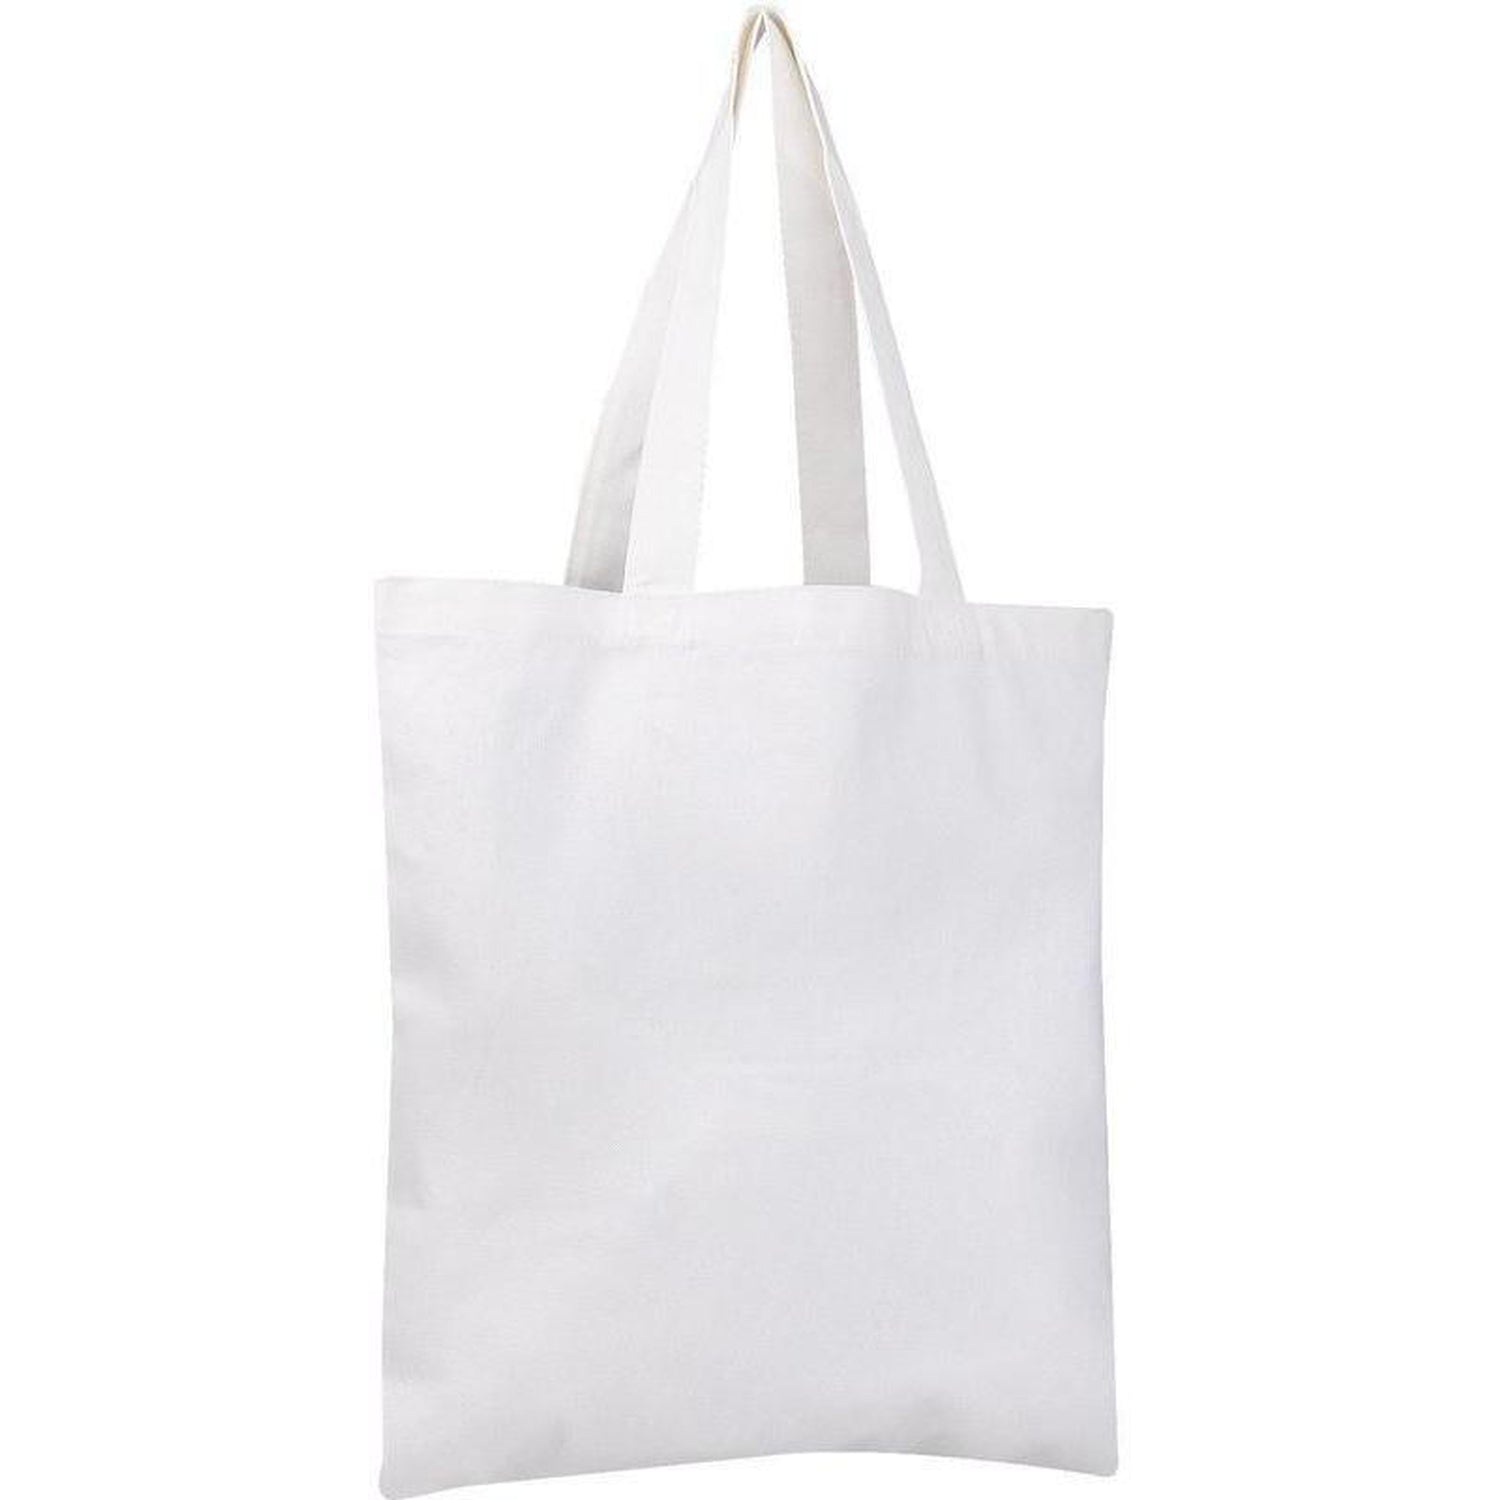 Wholesale Standard Size Canvas Tote Bags in Bulk – BagzDepot®